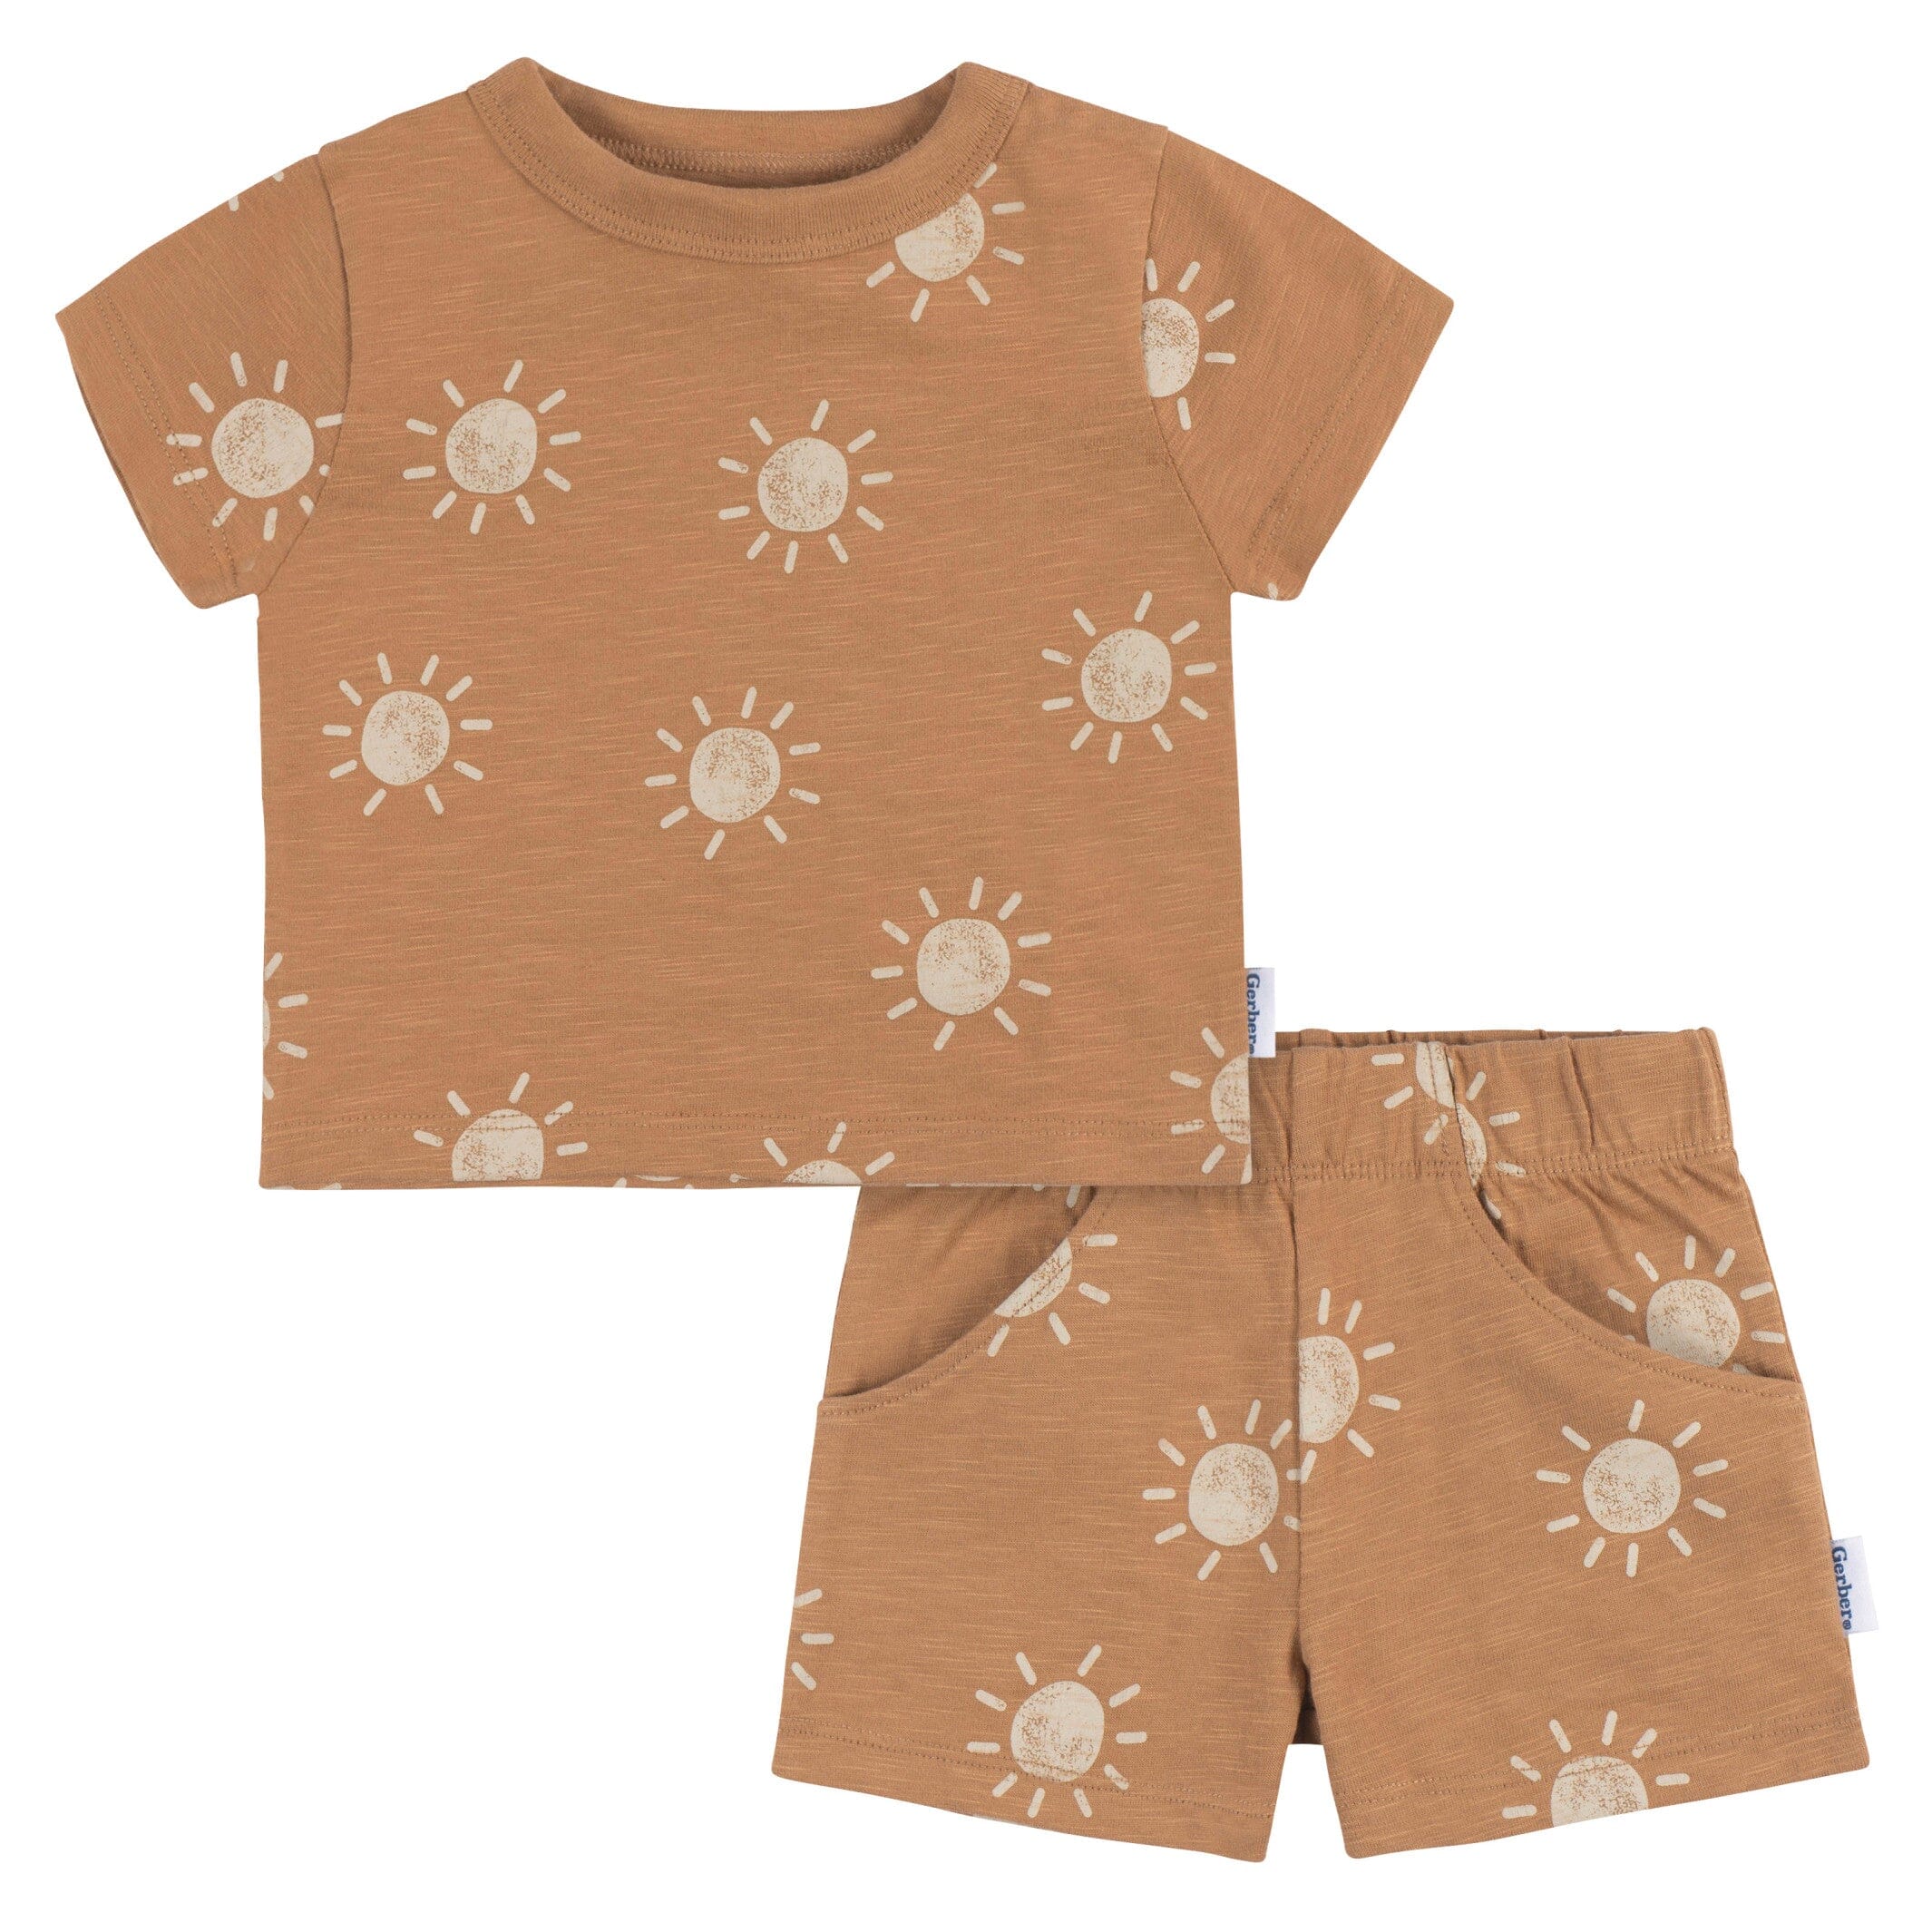 2-piece Toddler Boy Letter Print Solid Color Tee and Elasticized Shorts Set